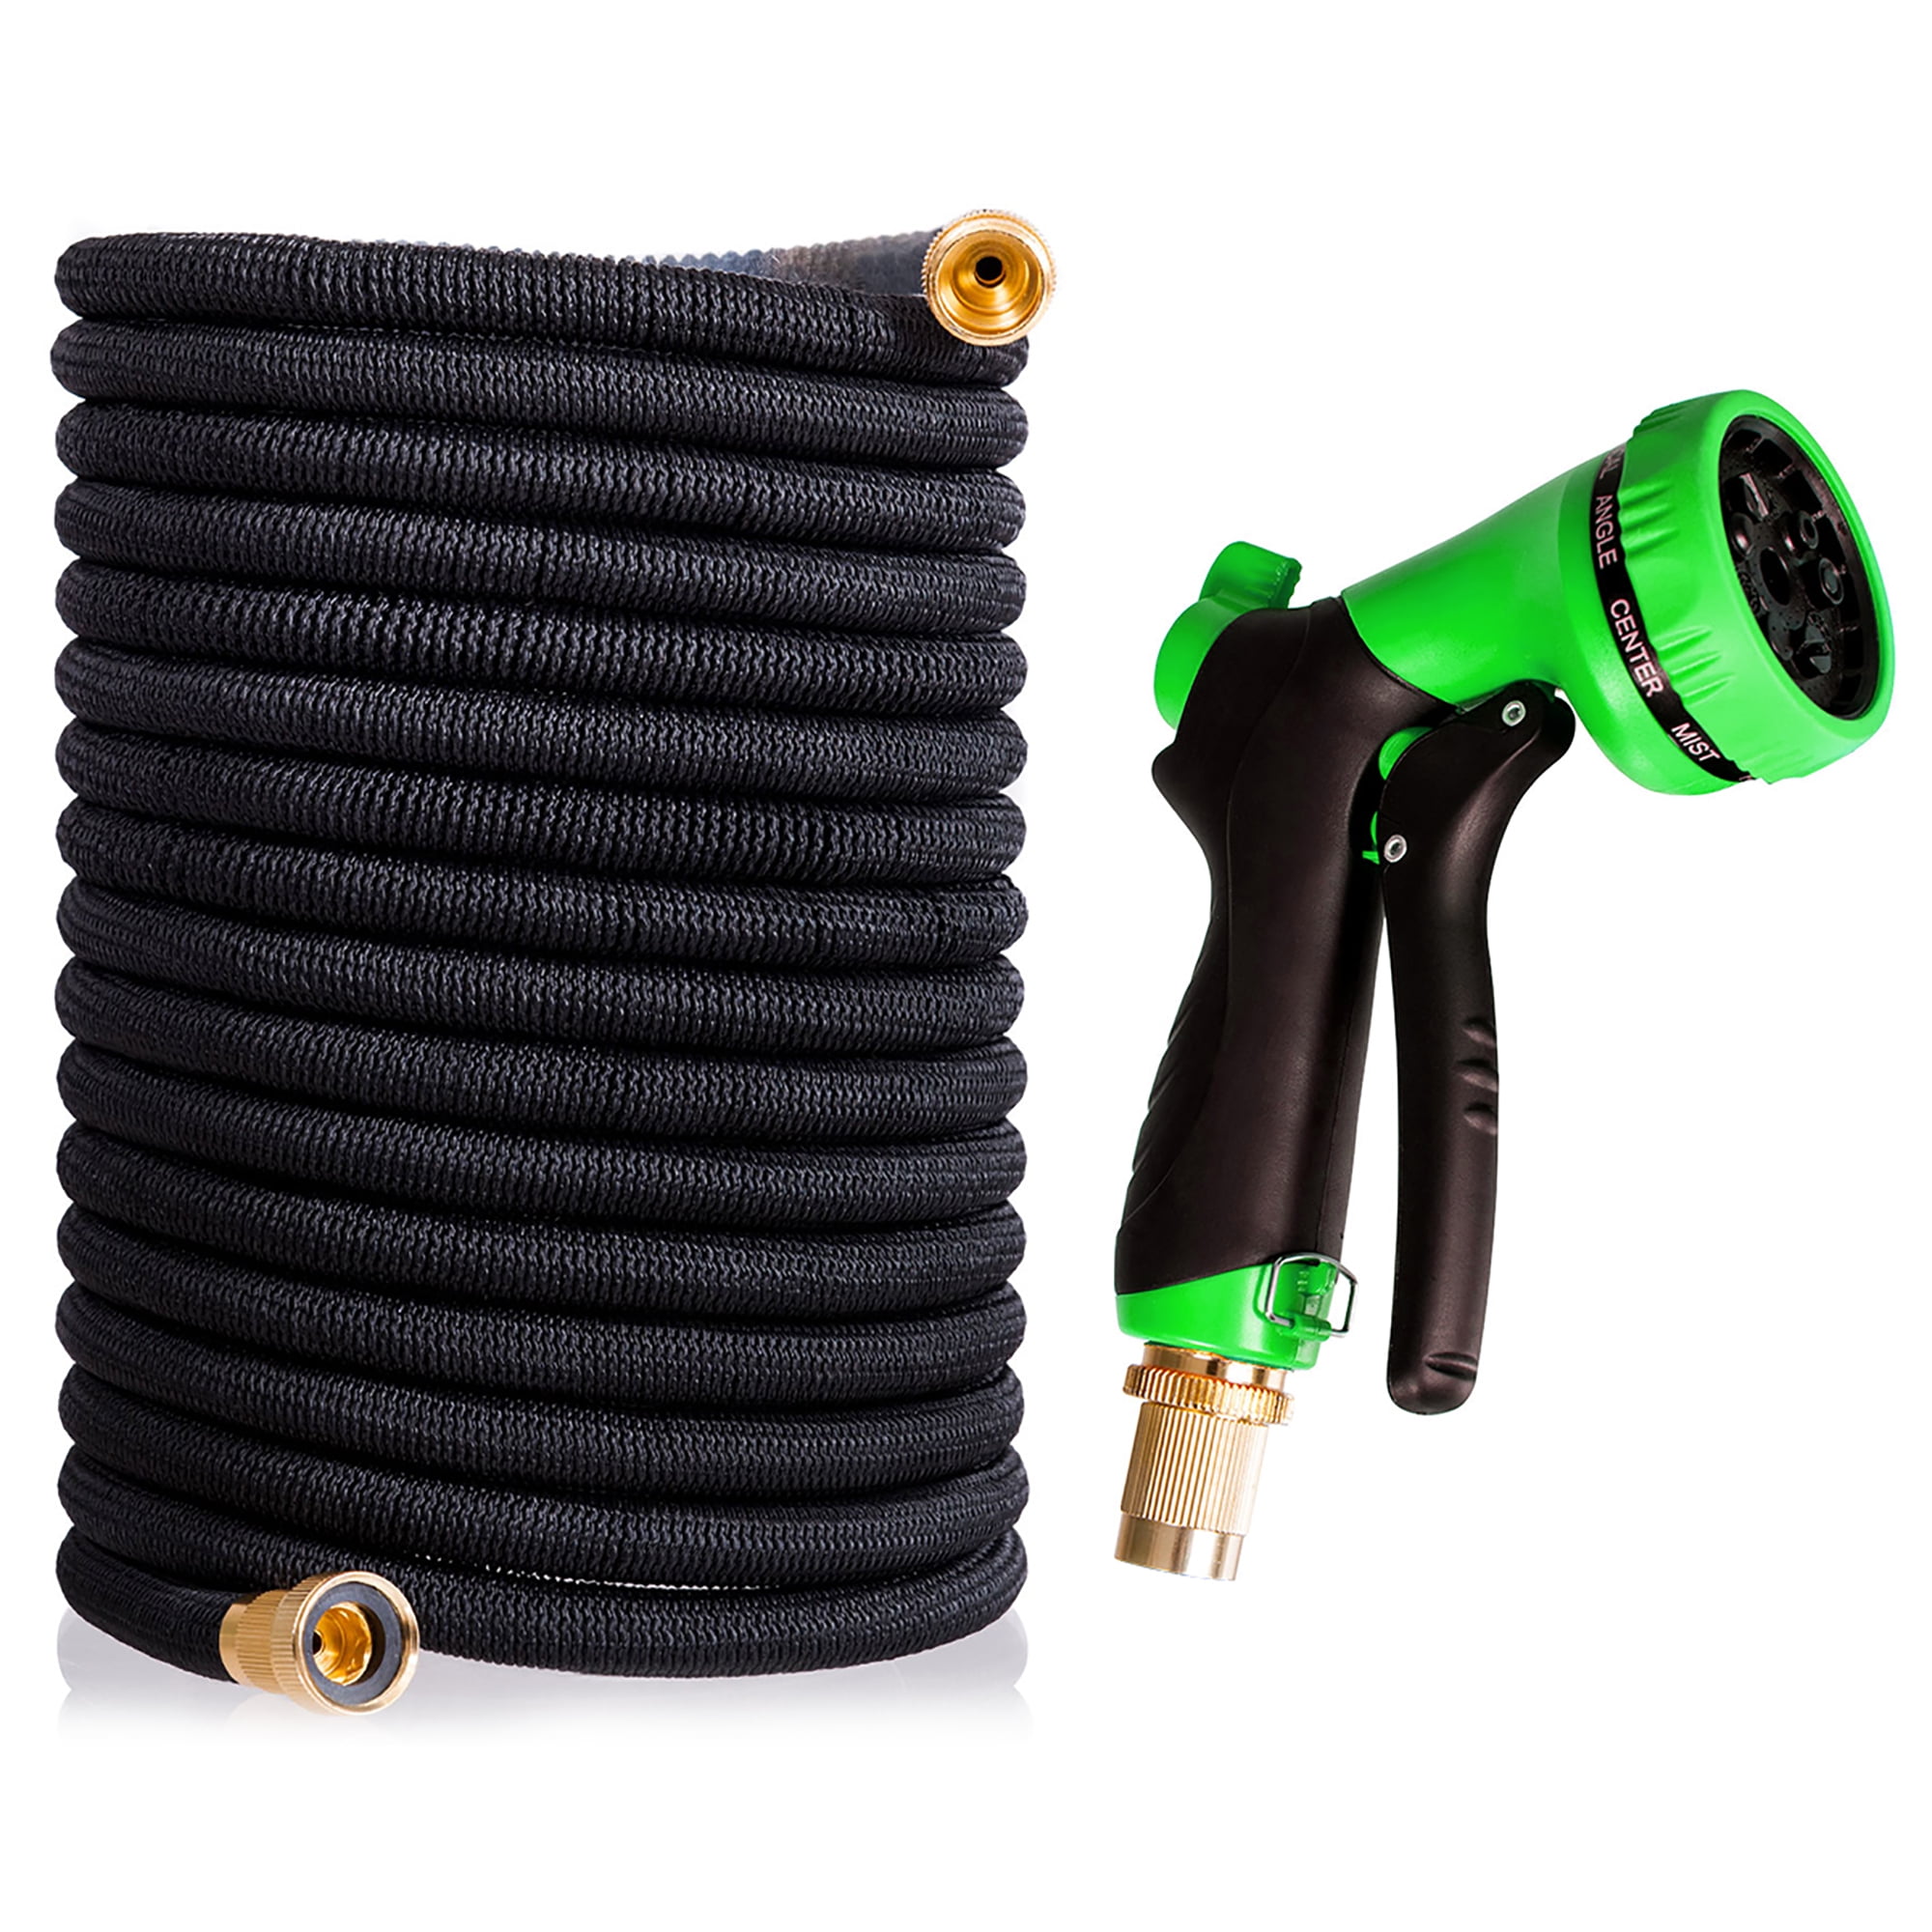 Expandable Garden Hose 75ft No Kink Retractable Water Hose with 10 Setting Nozzle Collapsible Outdoor Hose for Yard Lawn Flexible Lightweight Expanding Garden Hose 